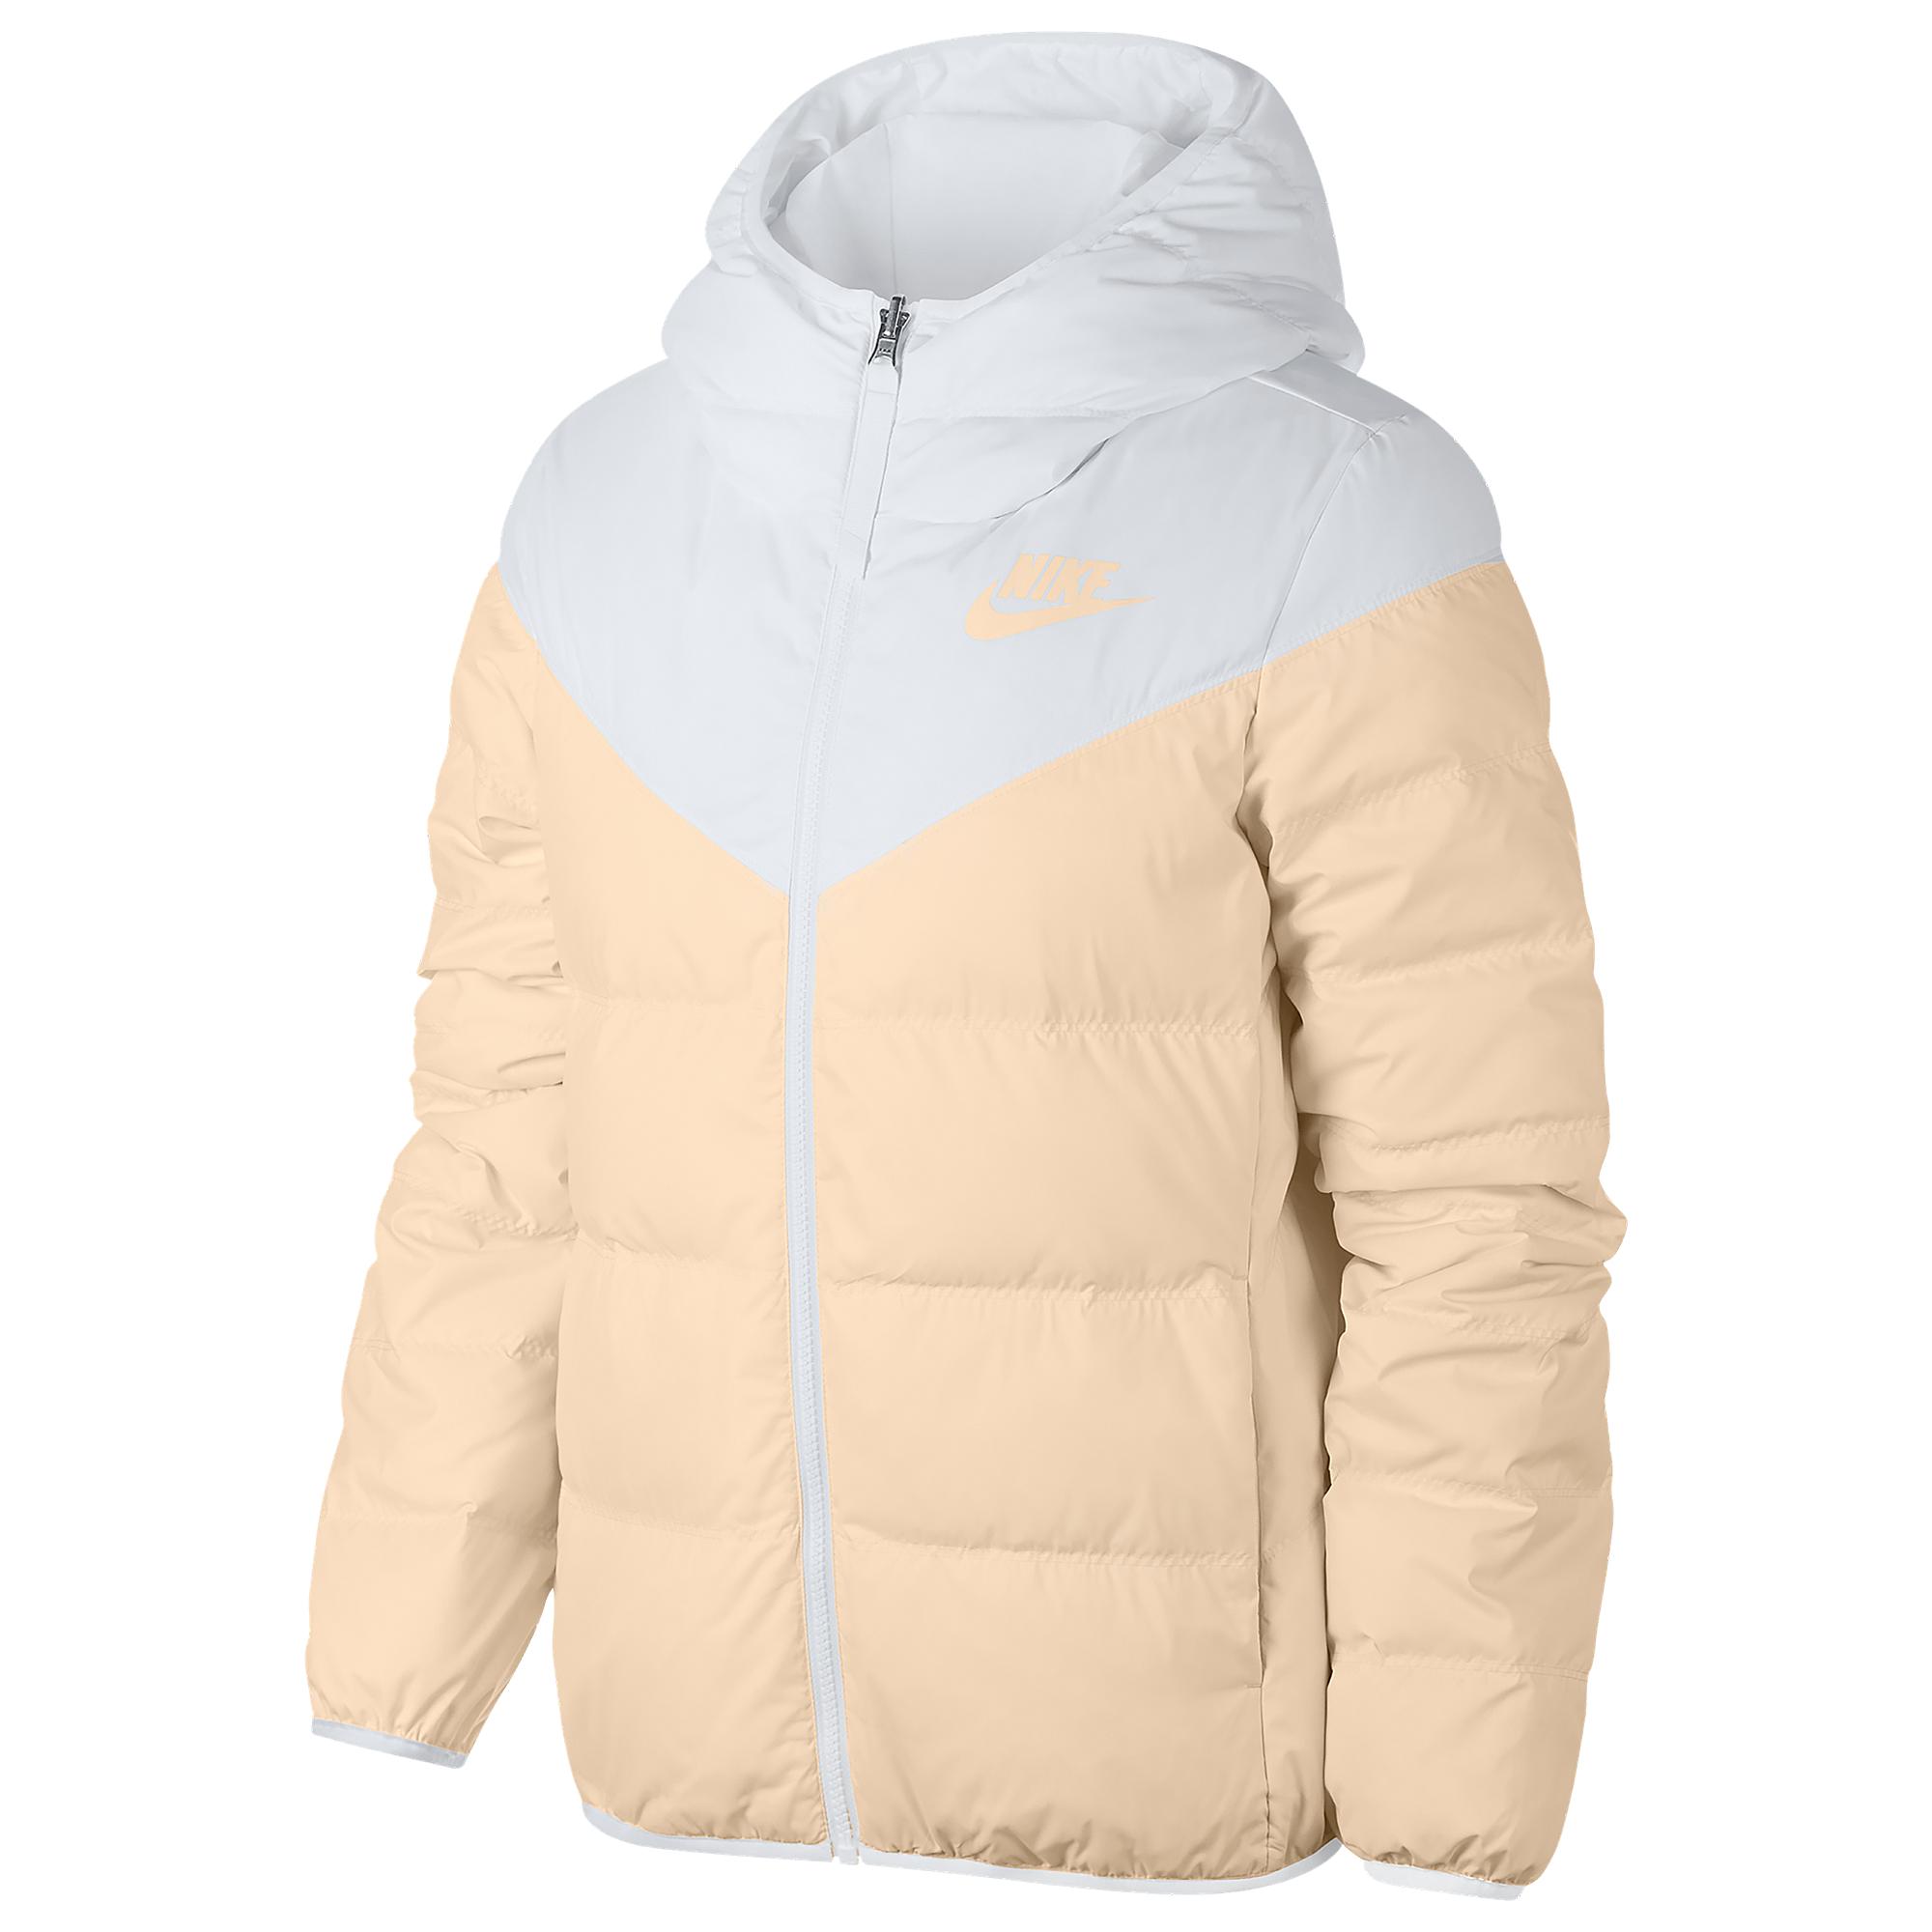 Nike Synthetic Reversible Down Fill Jacket in White/Guava Ice (White ...